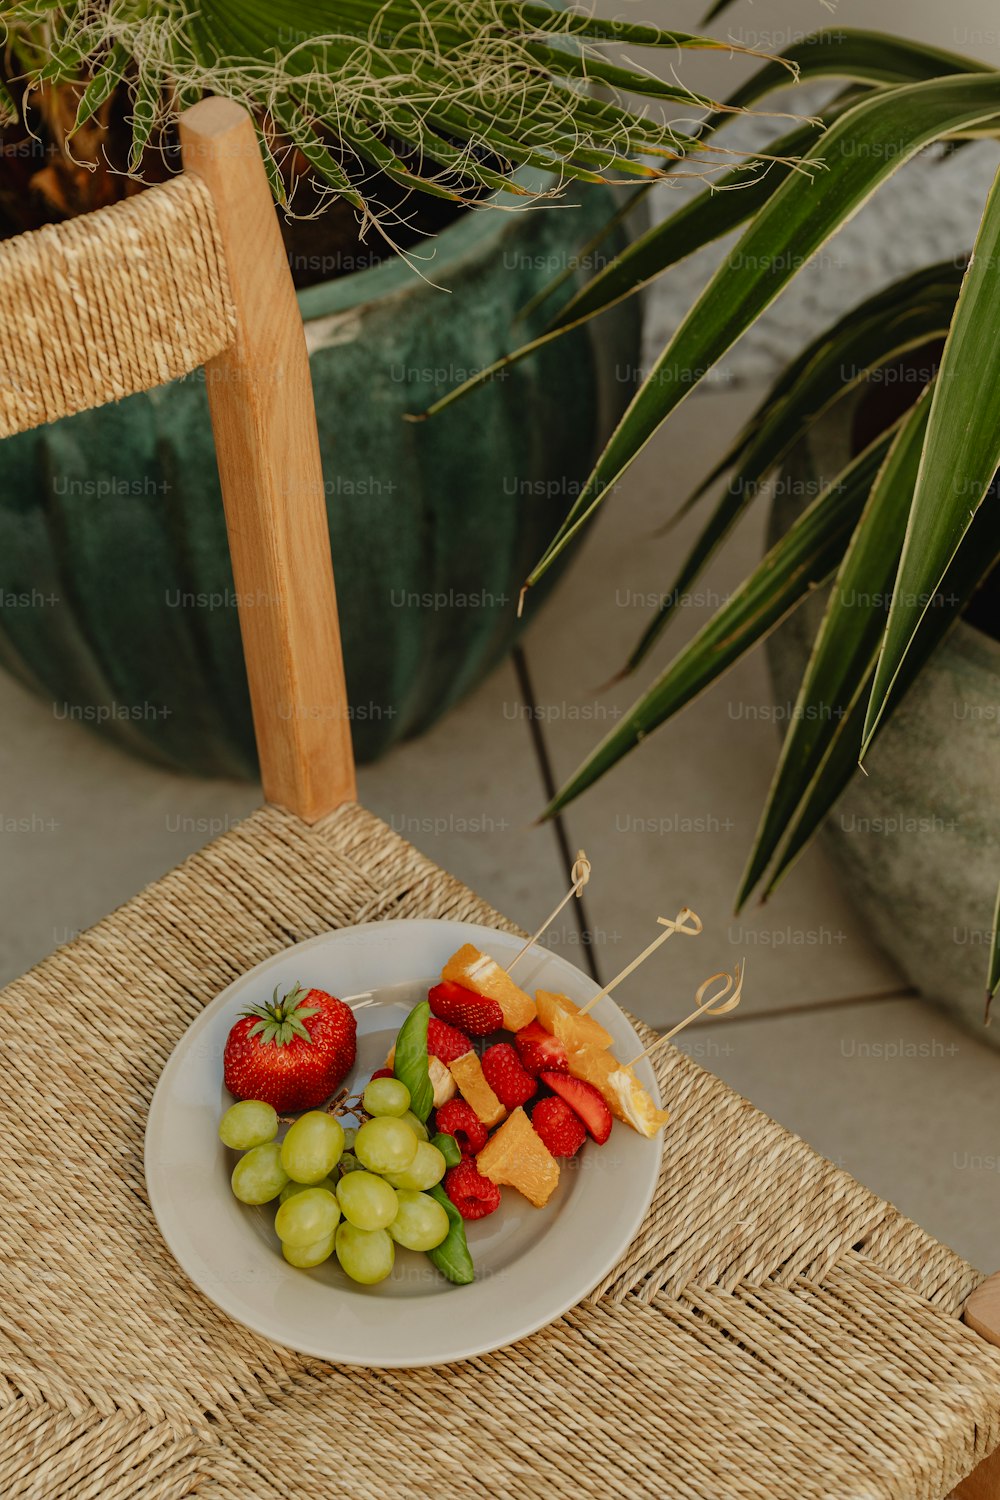 a plate of fruit on a wicker chair